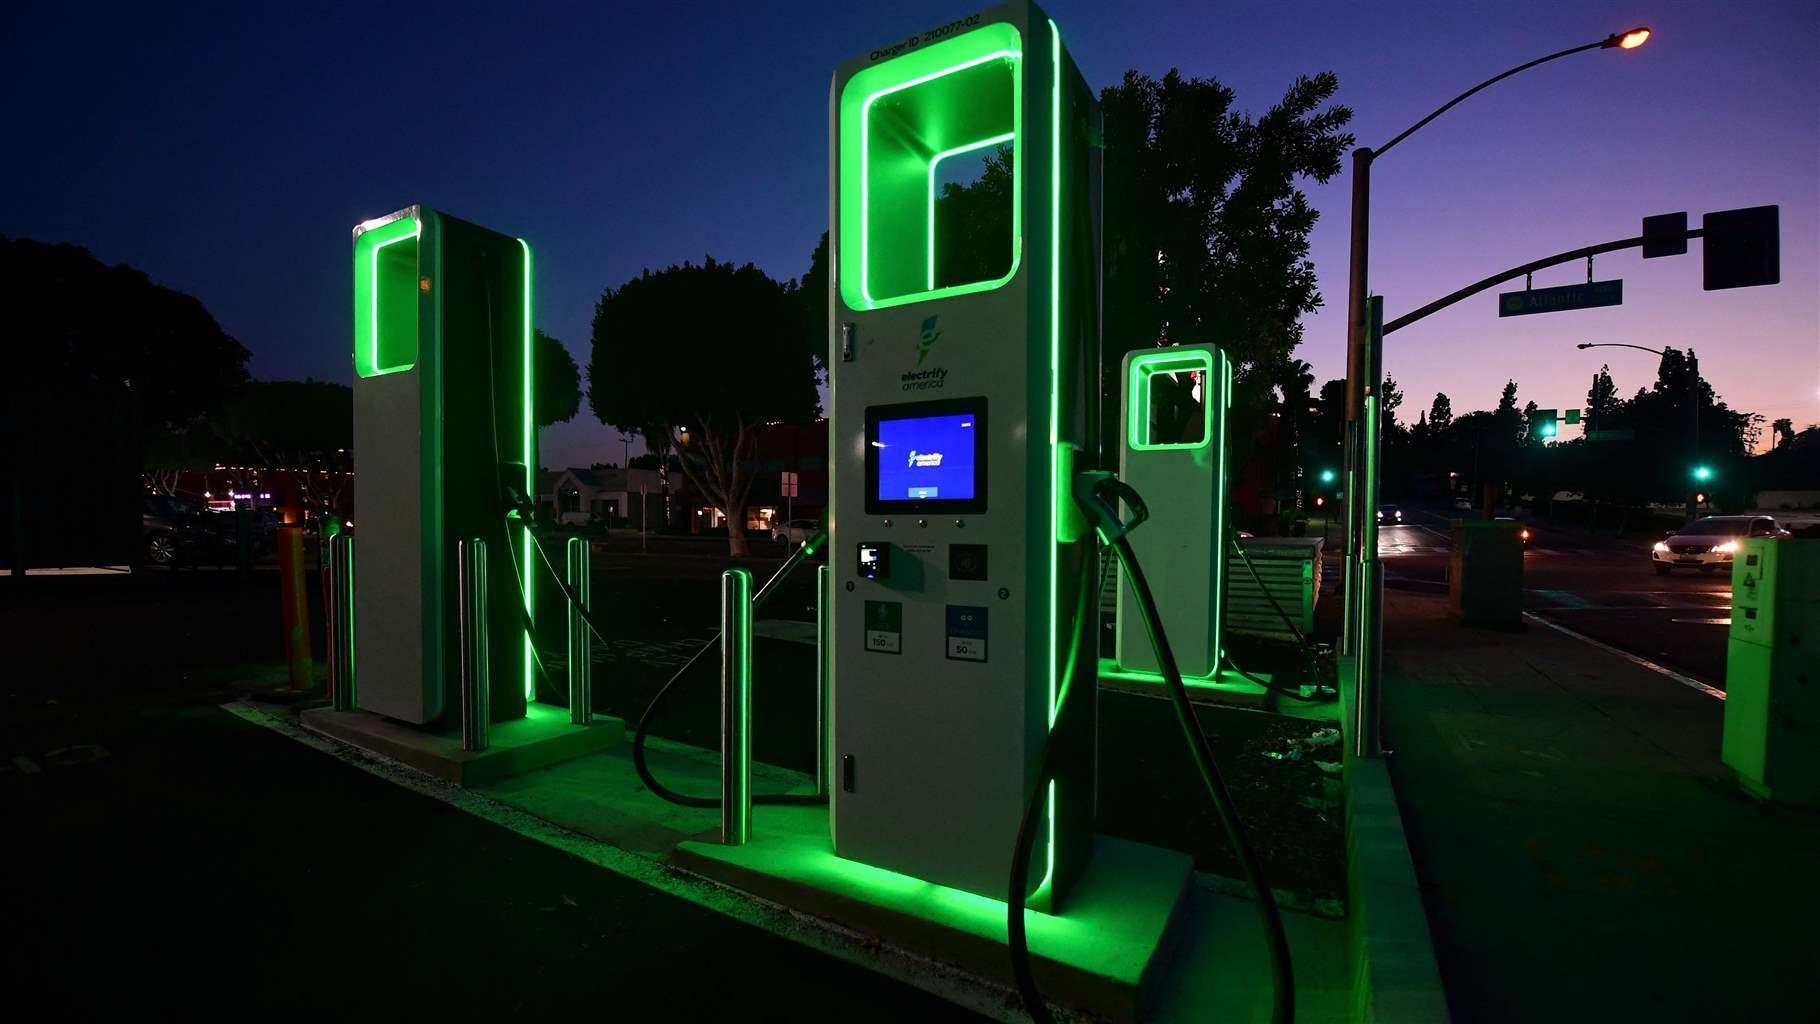 An EV charging station illuminated with green led light at night.